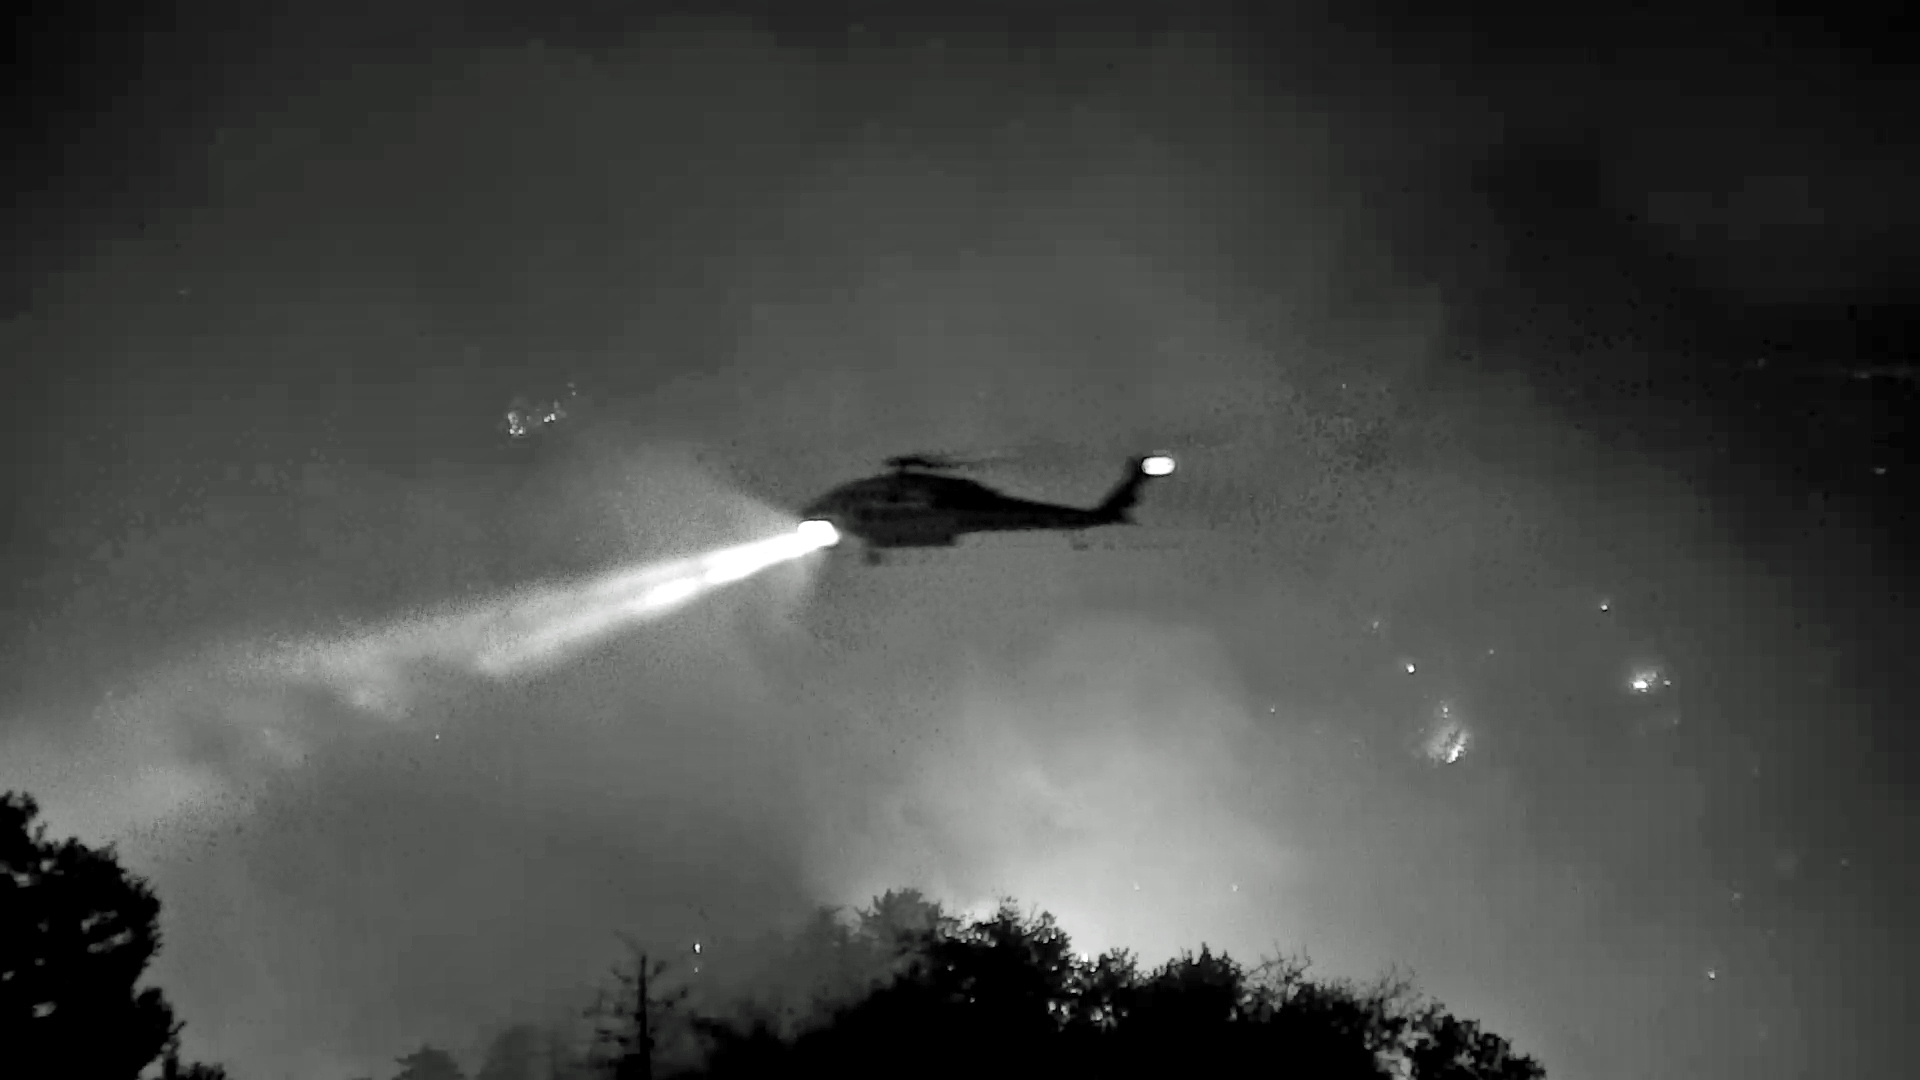 A black and white image taken from a web-camera that shows the dark silhouette of a helicopter against a grainy sky in shades of gray and candlelight. A beacon of bright light erupts from the helicopter and shines down on the tree canopies seen at the very bottom edge of the photo. 